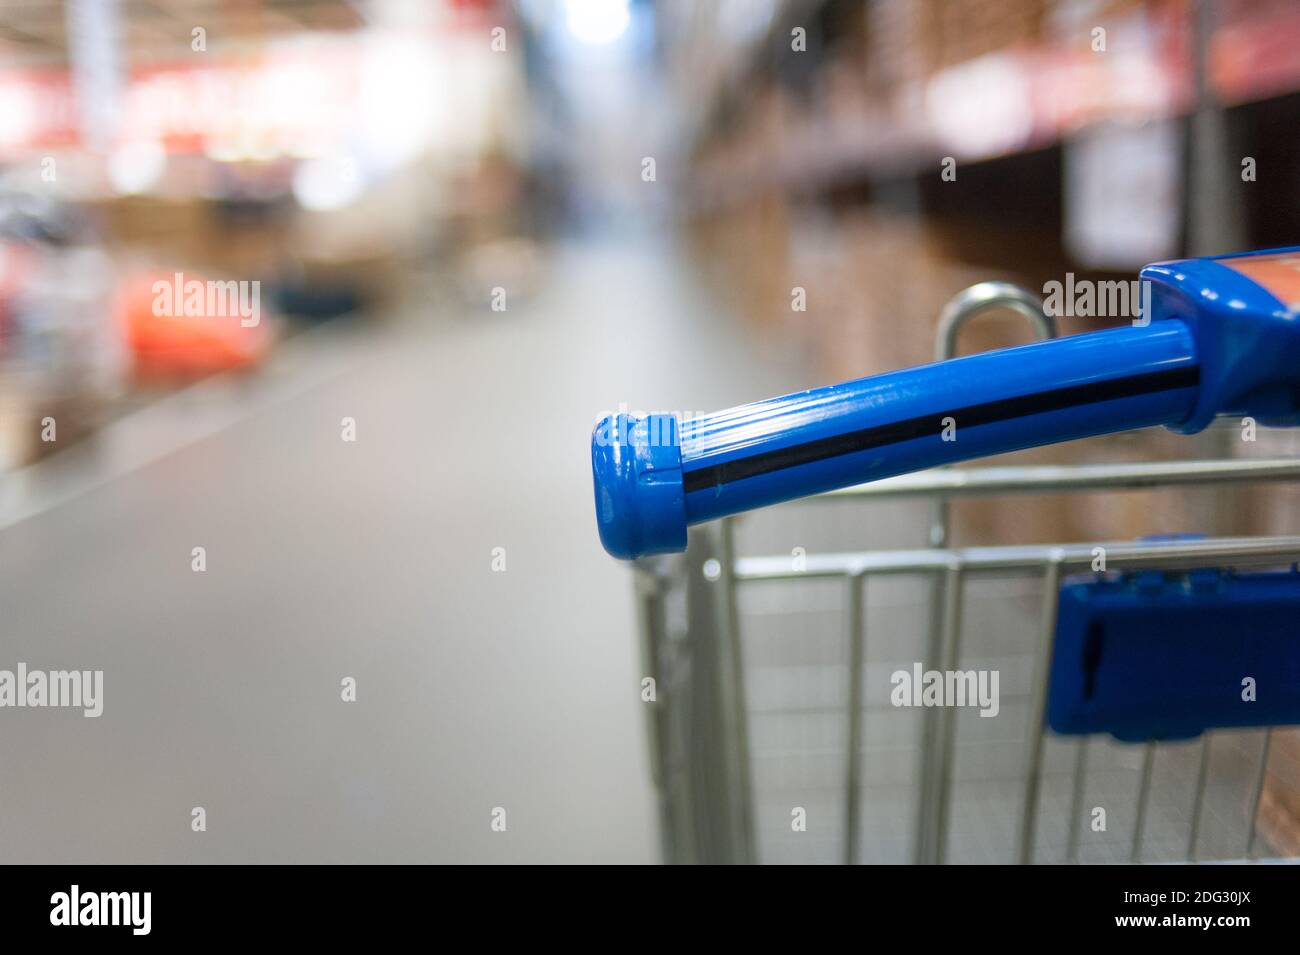 Closeup of shopping cart part with the perspective view of shopping mall shelves with goods Stock Photo